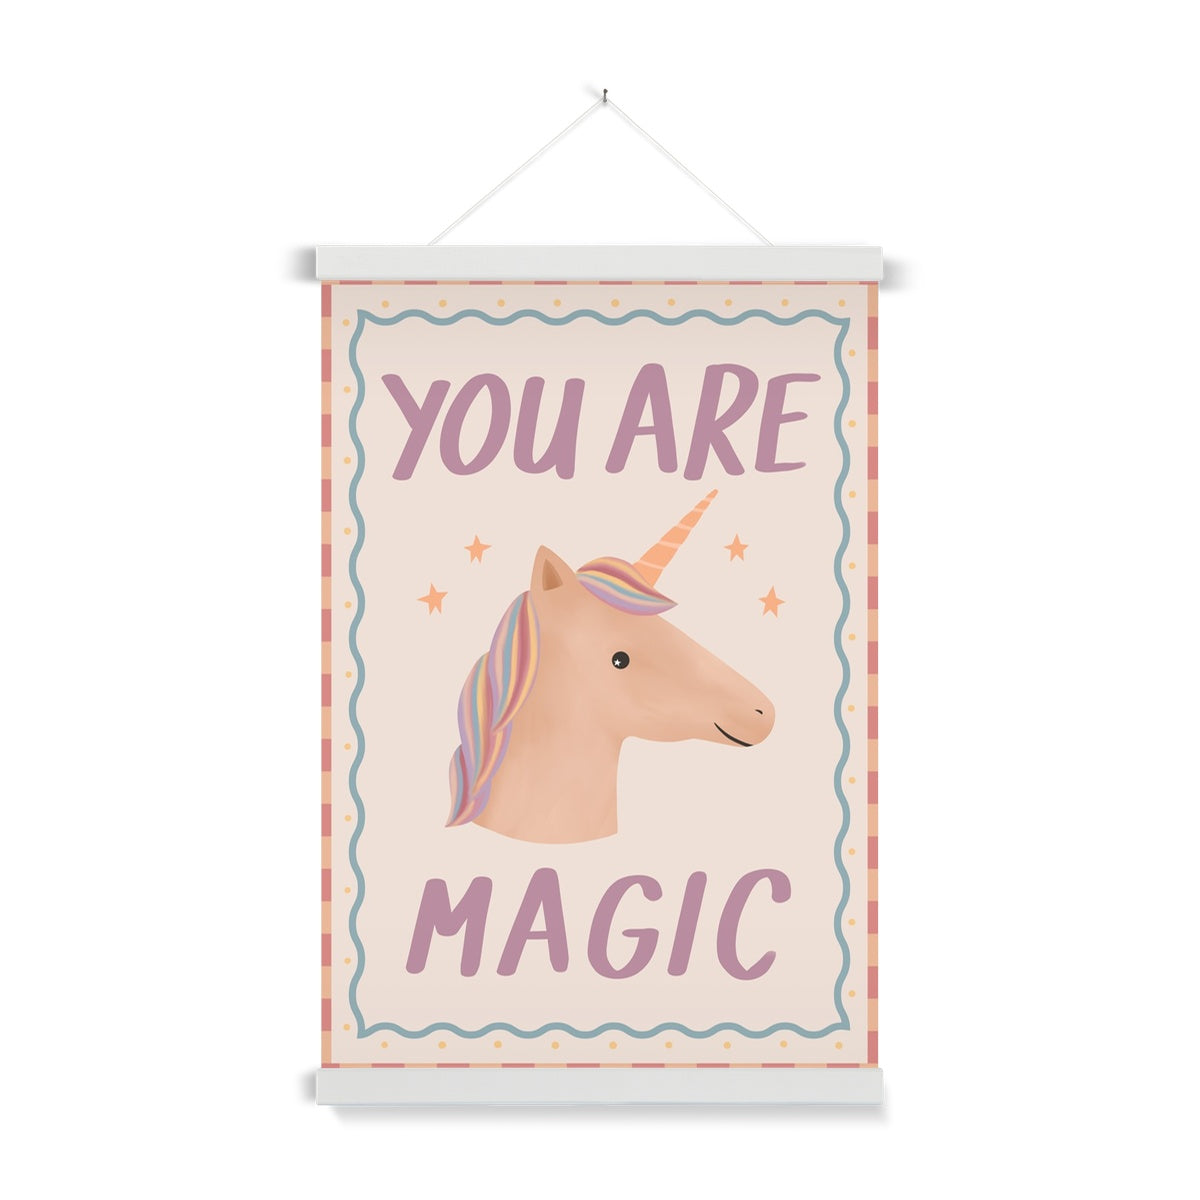 Your Are Magic / Print with Hanger